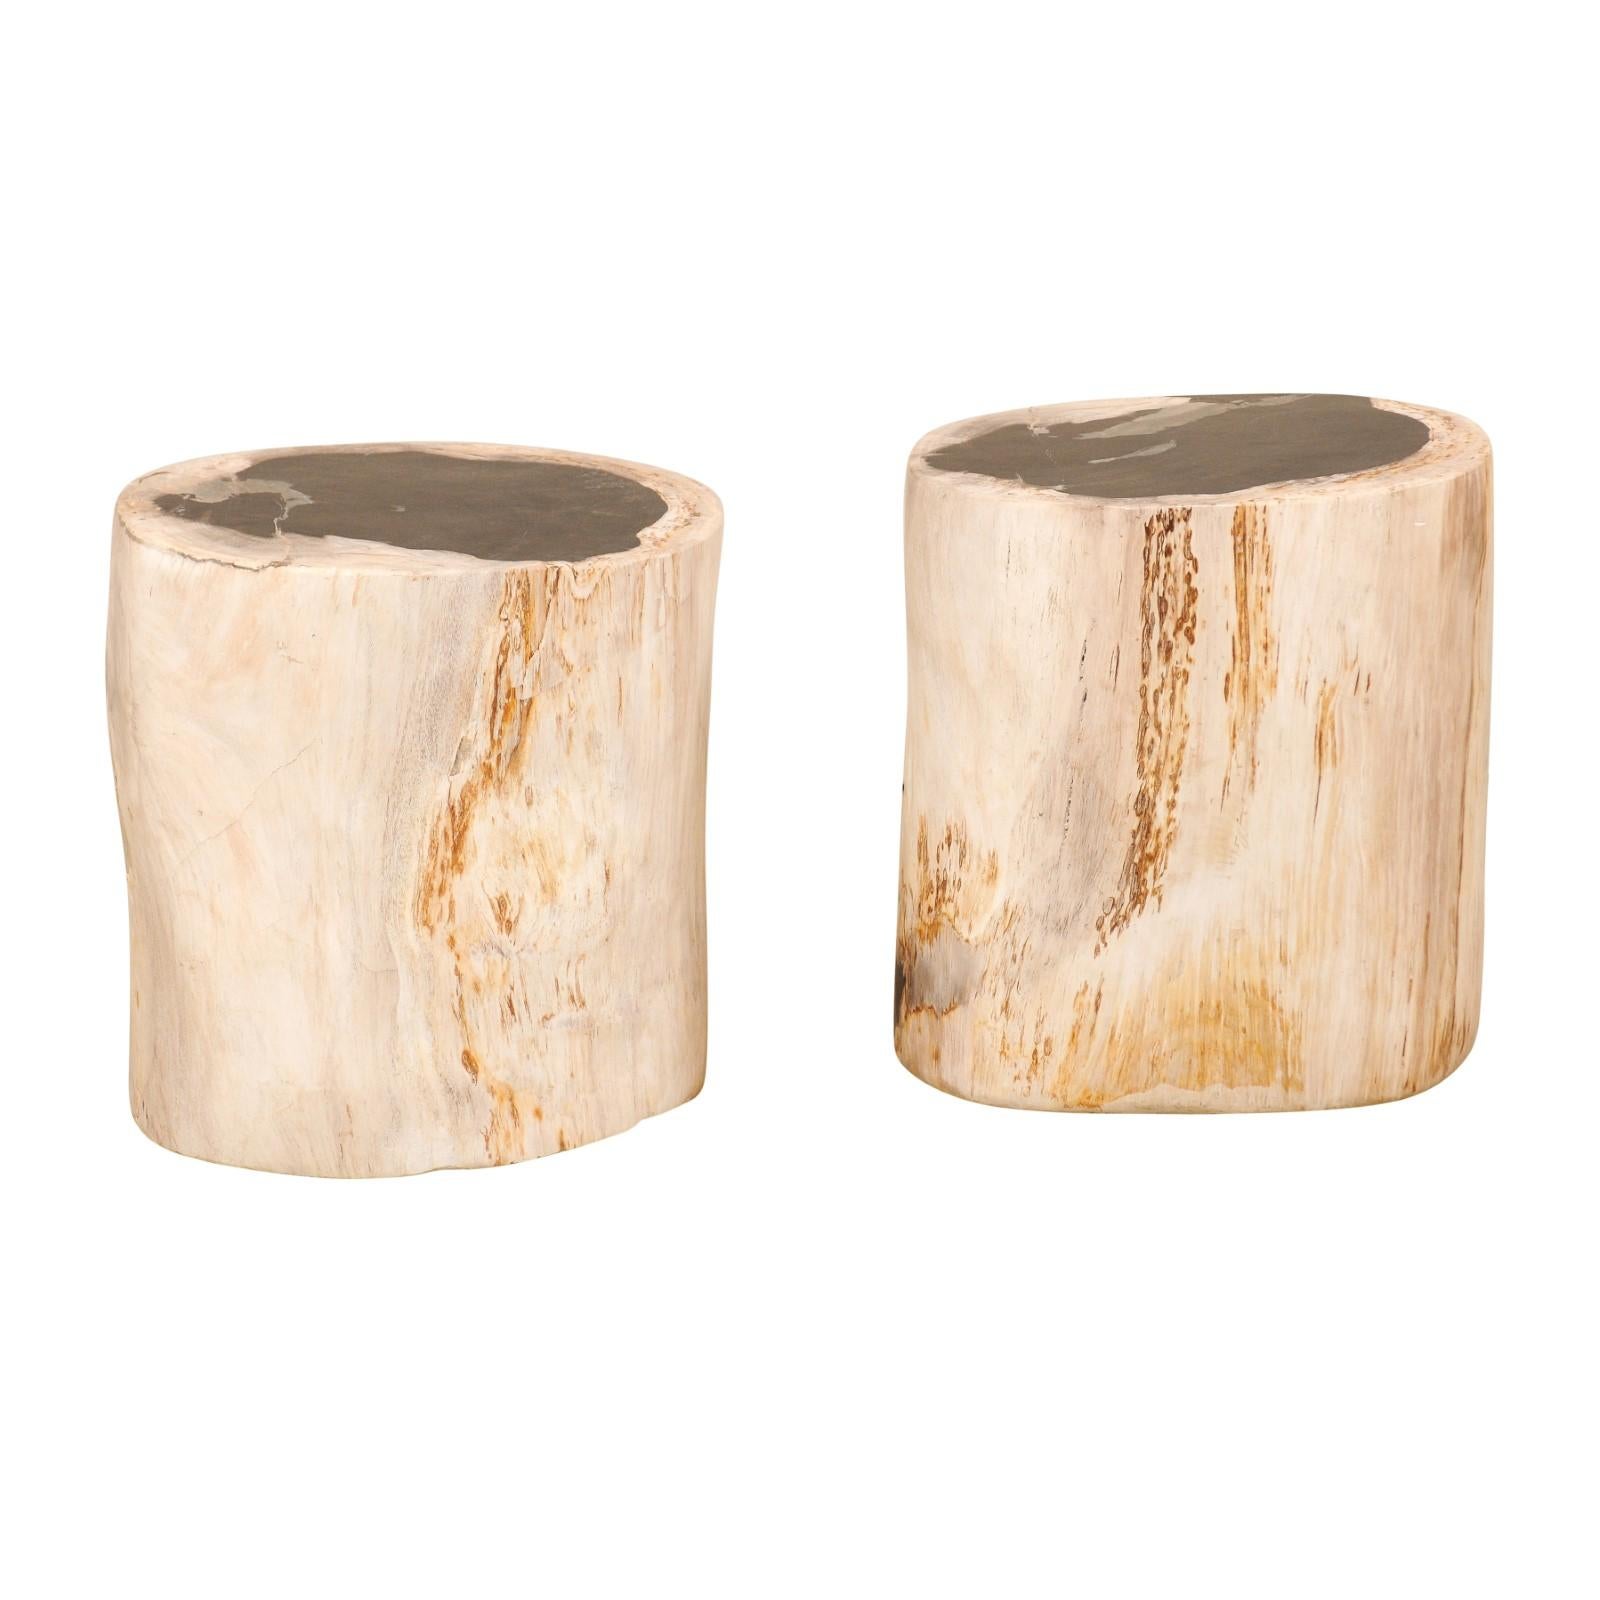 Pair of Petrified Wood Stools or Pedestal Tables with Black Tops & Light Sides